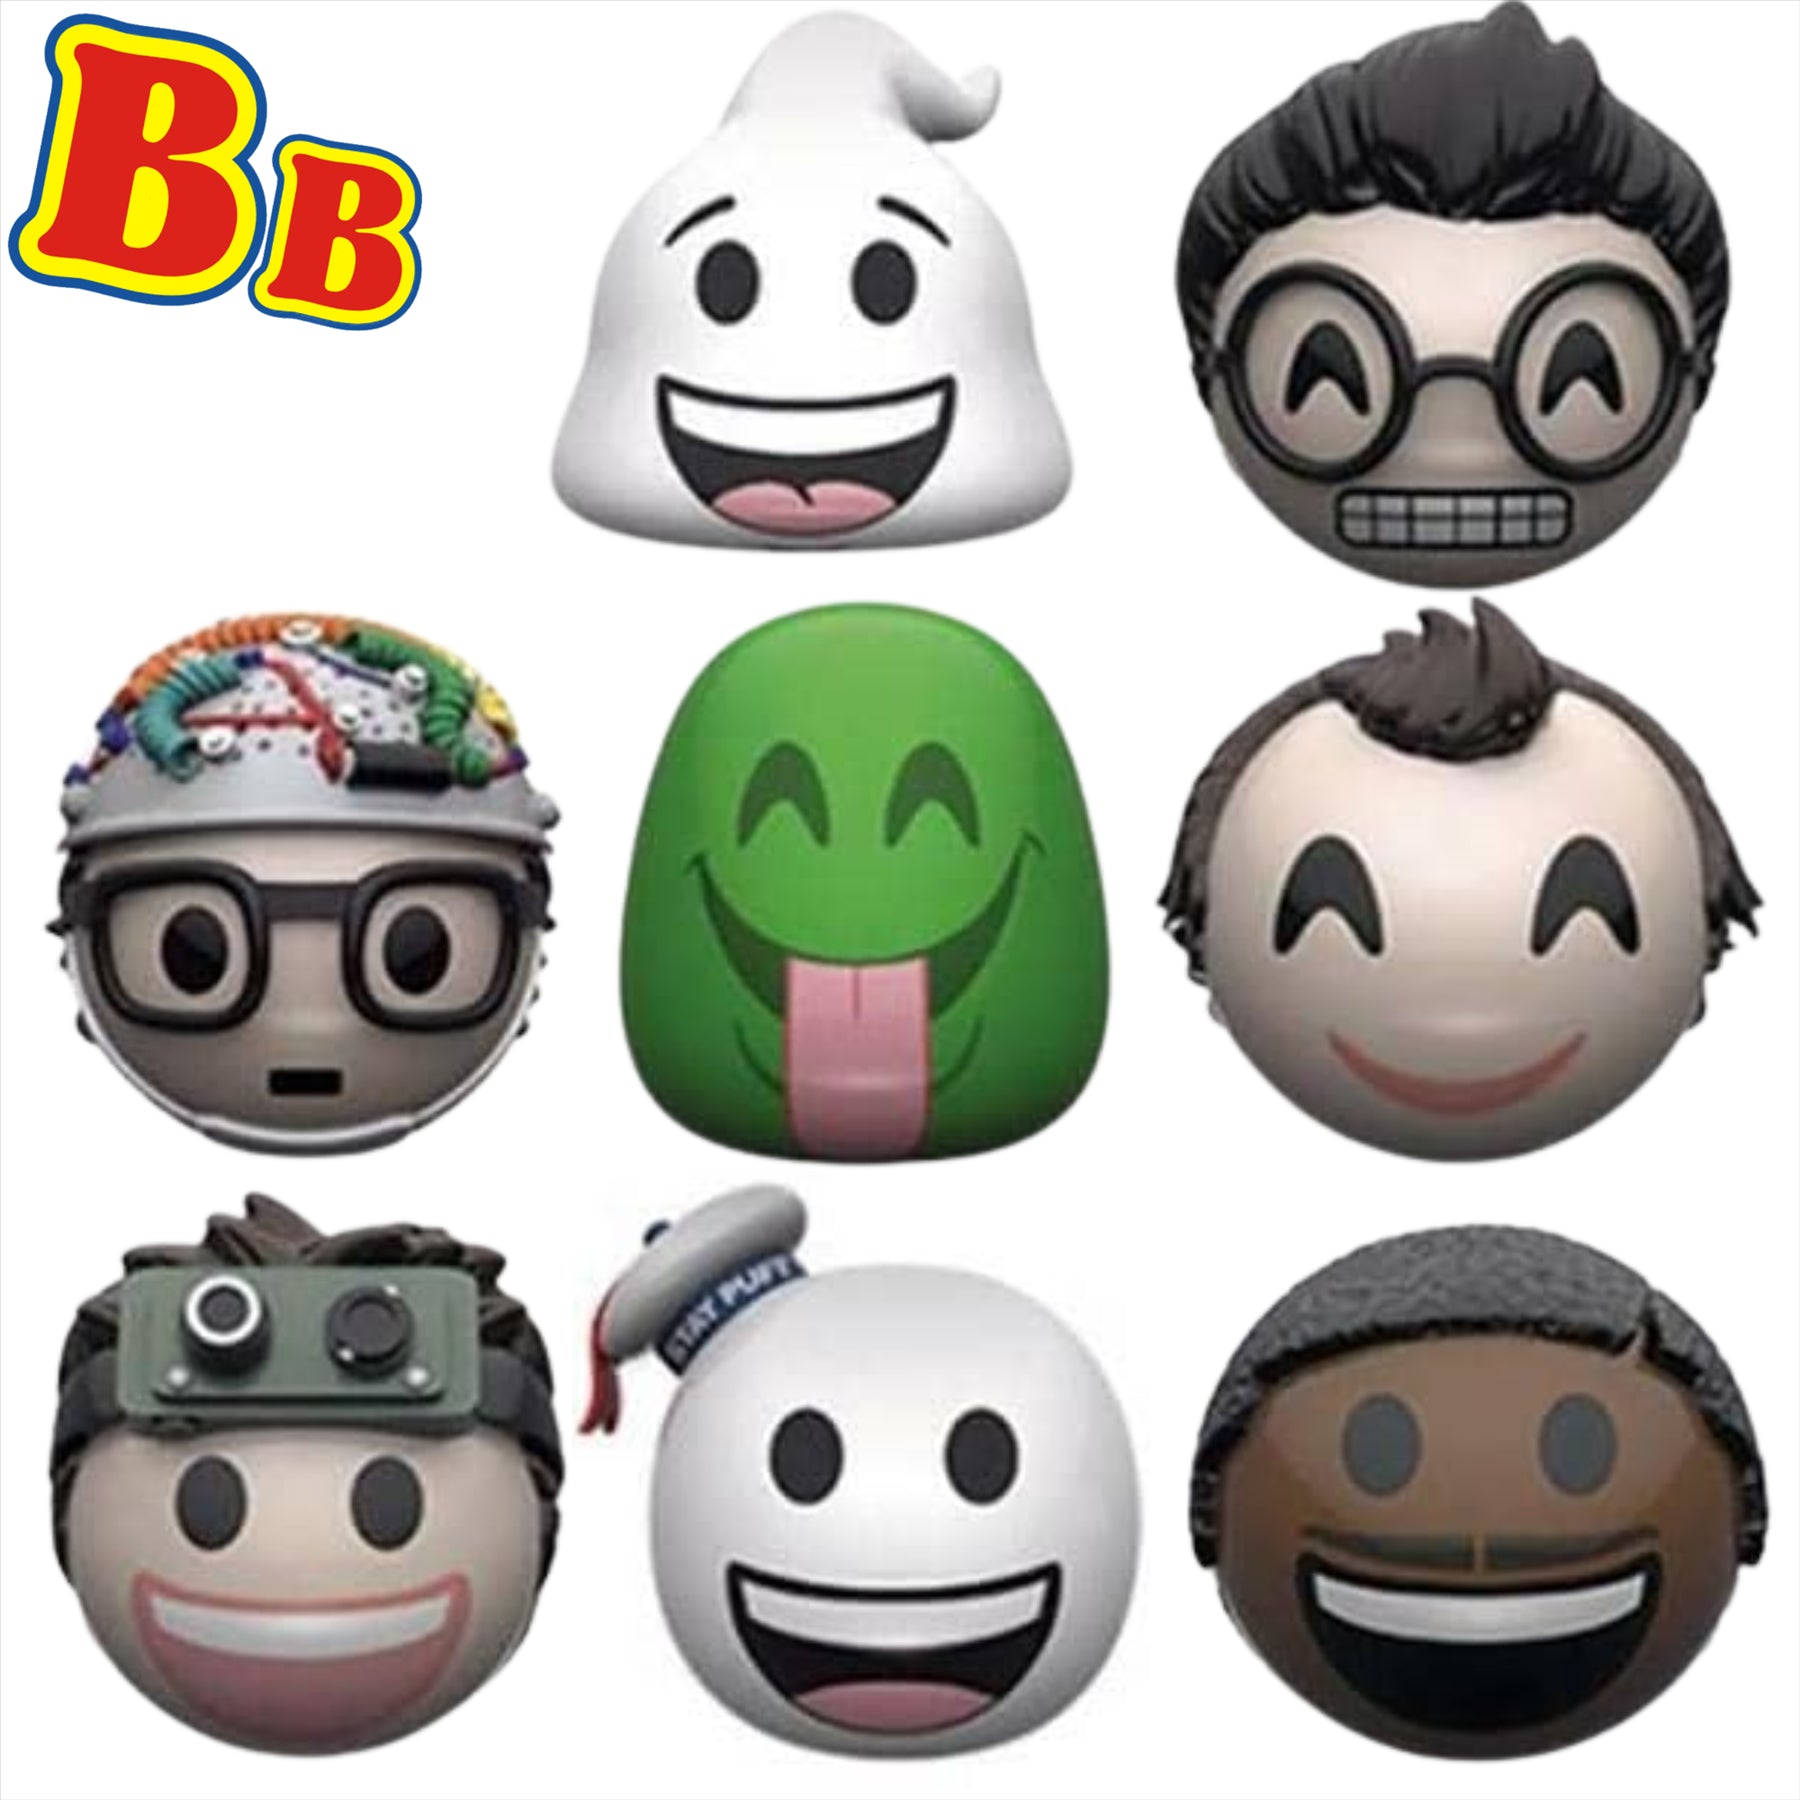 Ghostbusters - FunkoMyMoji Identified 4cm Collectible & Highly Detailed Figure Heads - Set 3 8-Pack - Toptoys2u